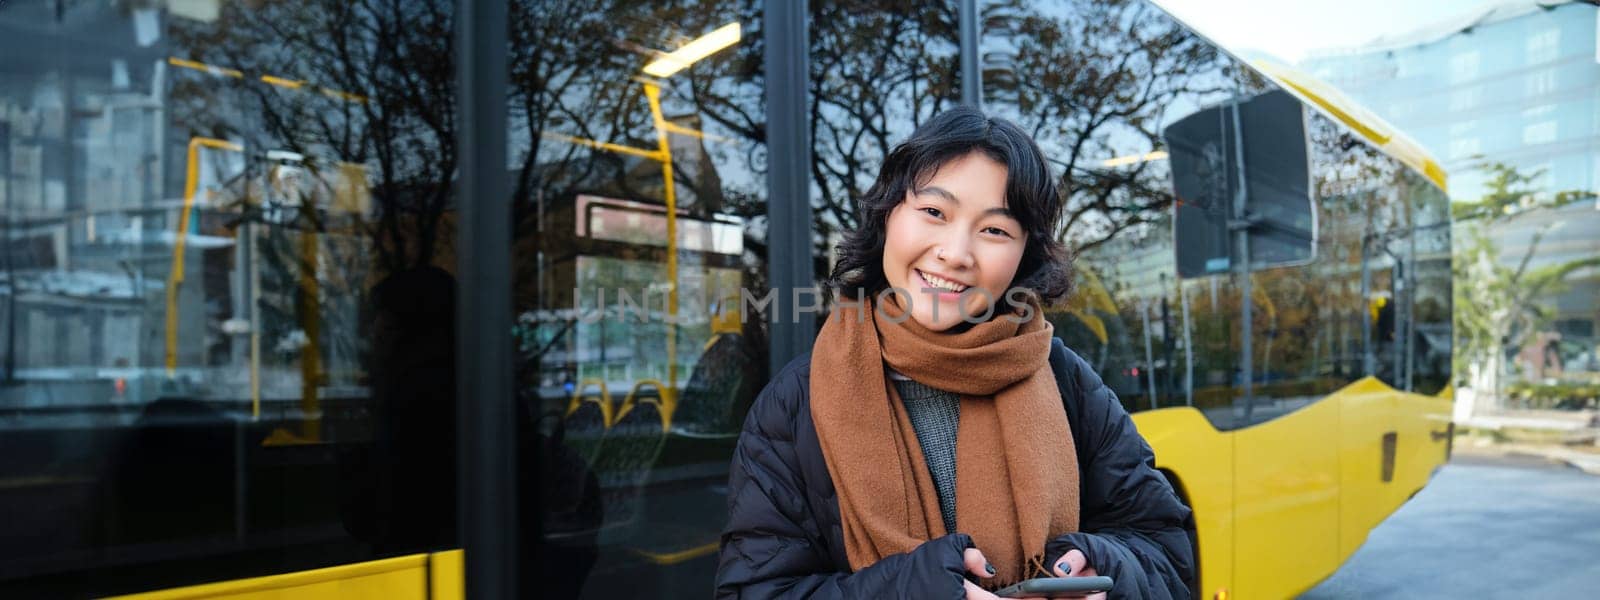 Portrait of korean girl buying ticket for public transport online, using mobile application on bus stop, wearing winter clothes.